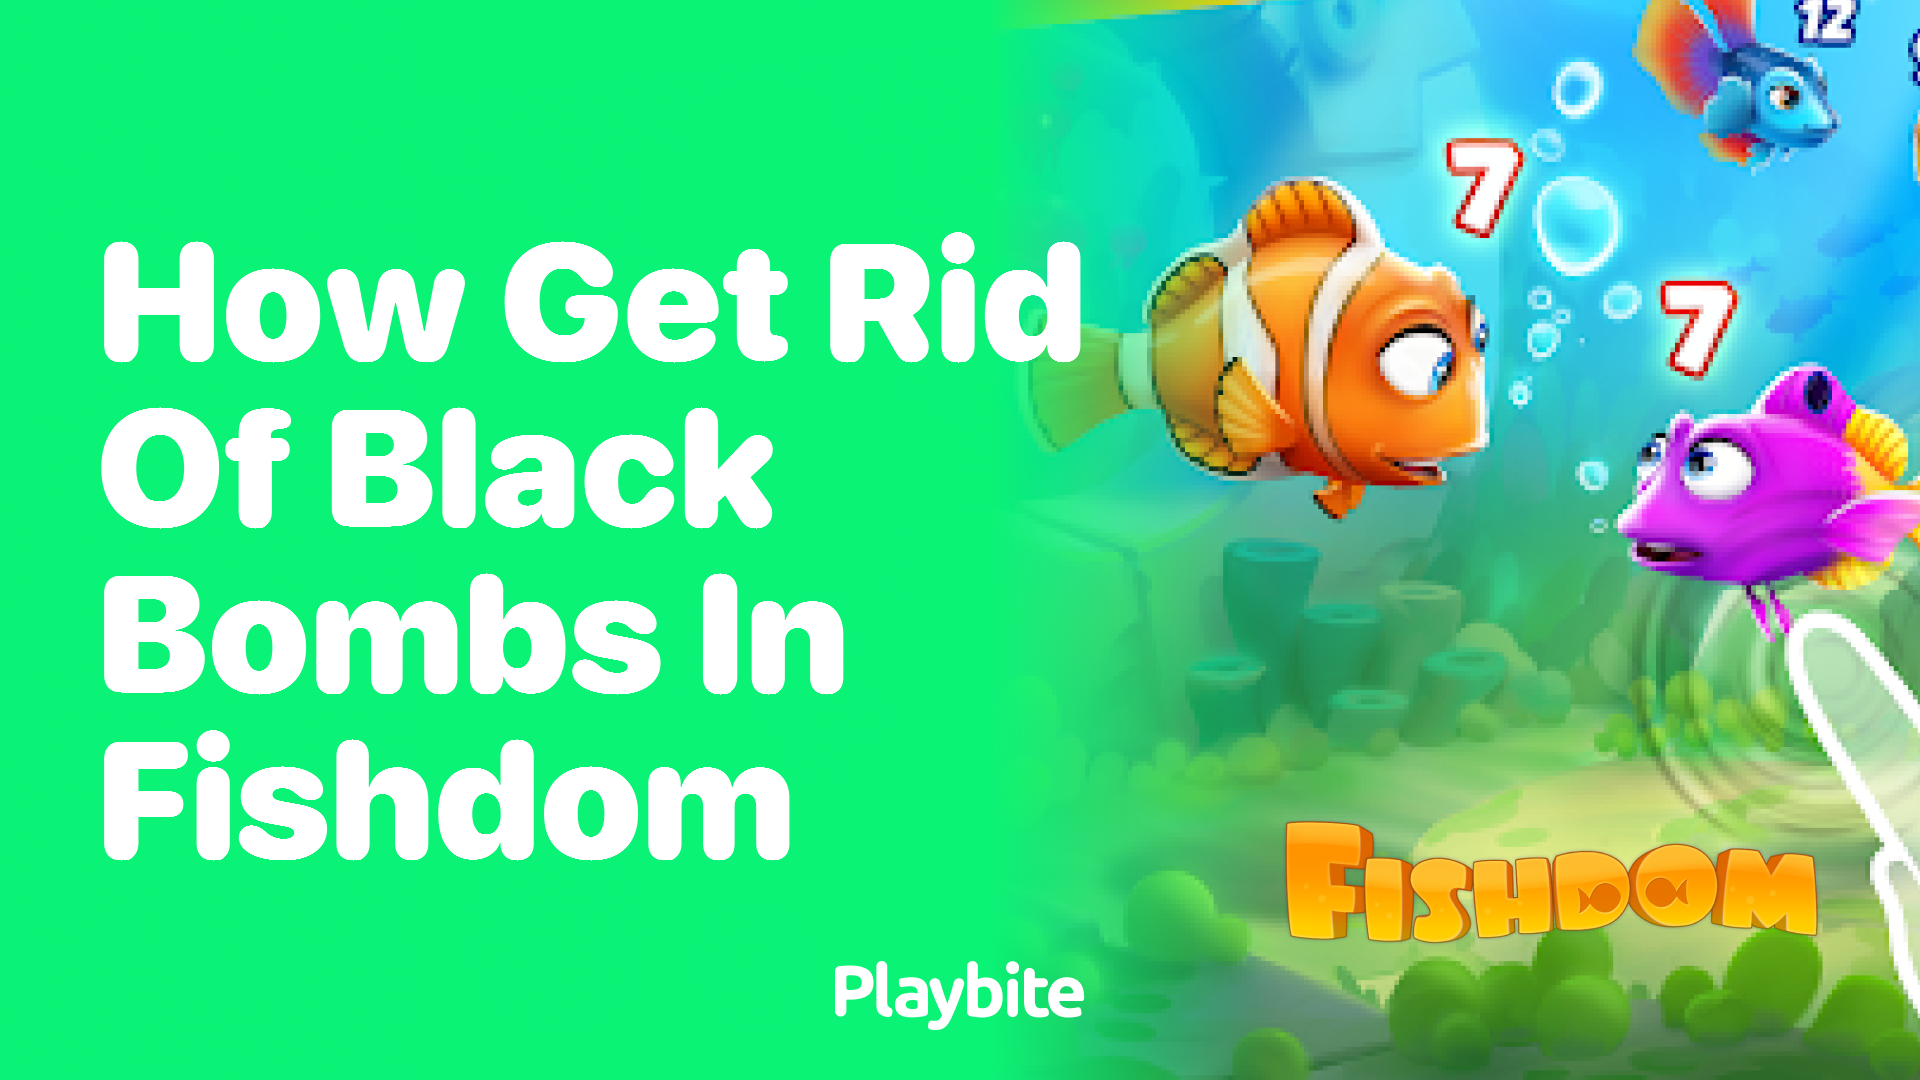 How to Get Rid of Black Bombs in Fishdom